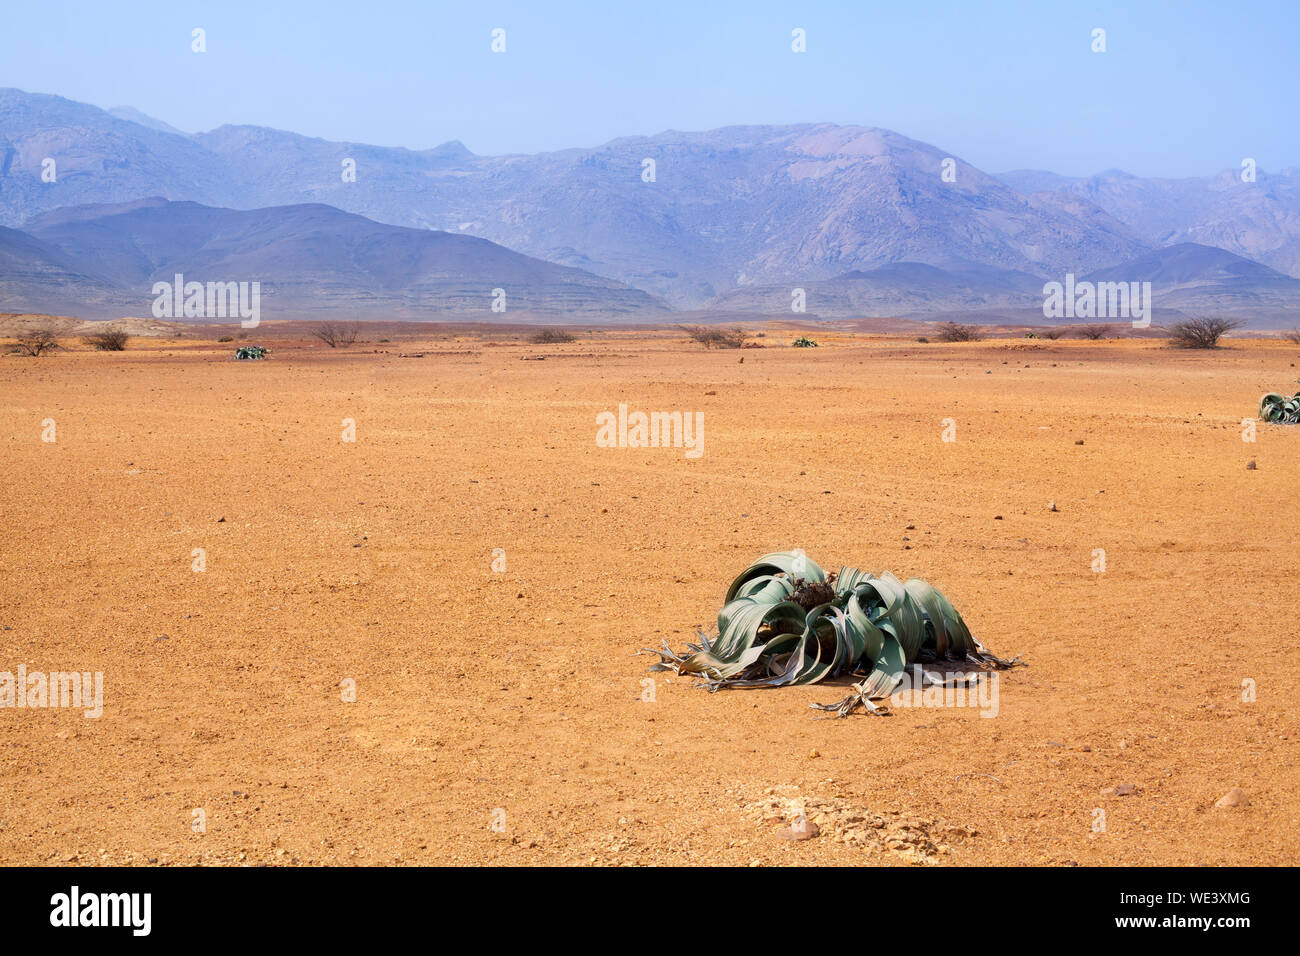 Welwitschia mirabilis flower in Namib desert on sand, blue sky and mountains background, ancient endemic desert plant of Namibia and Angola, Africa Stock Photo